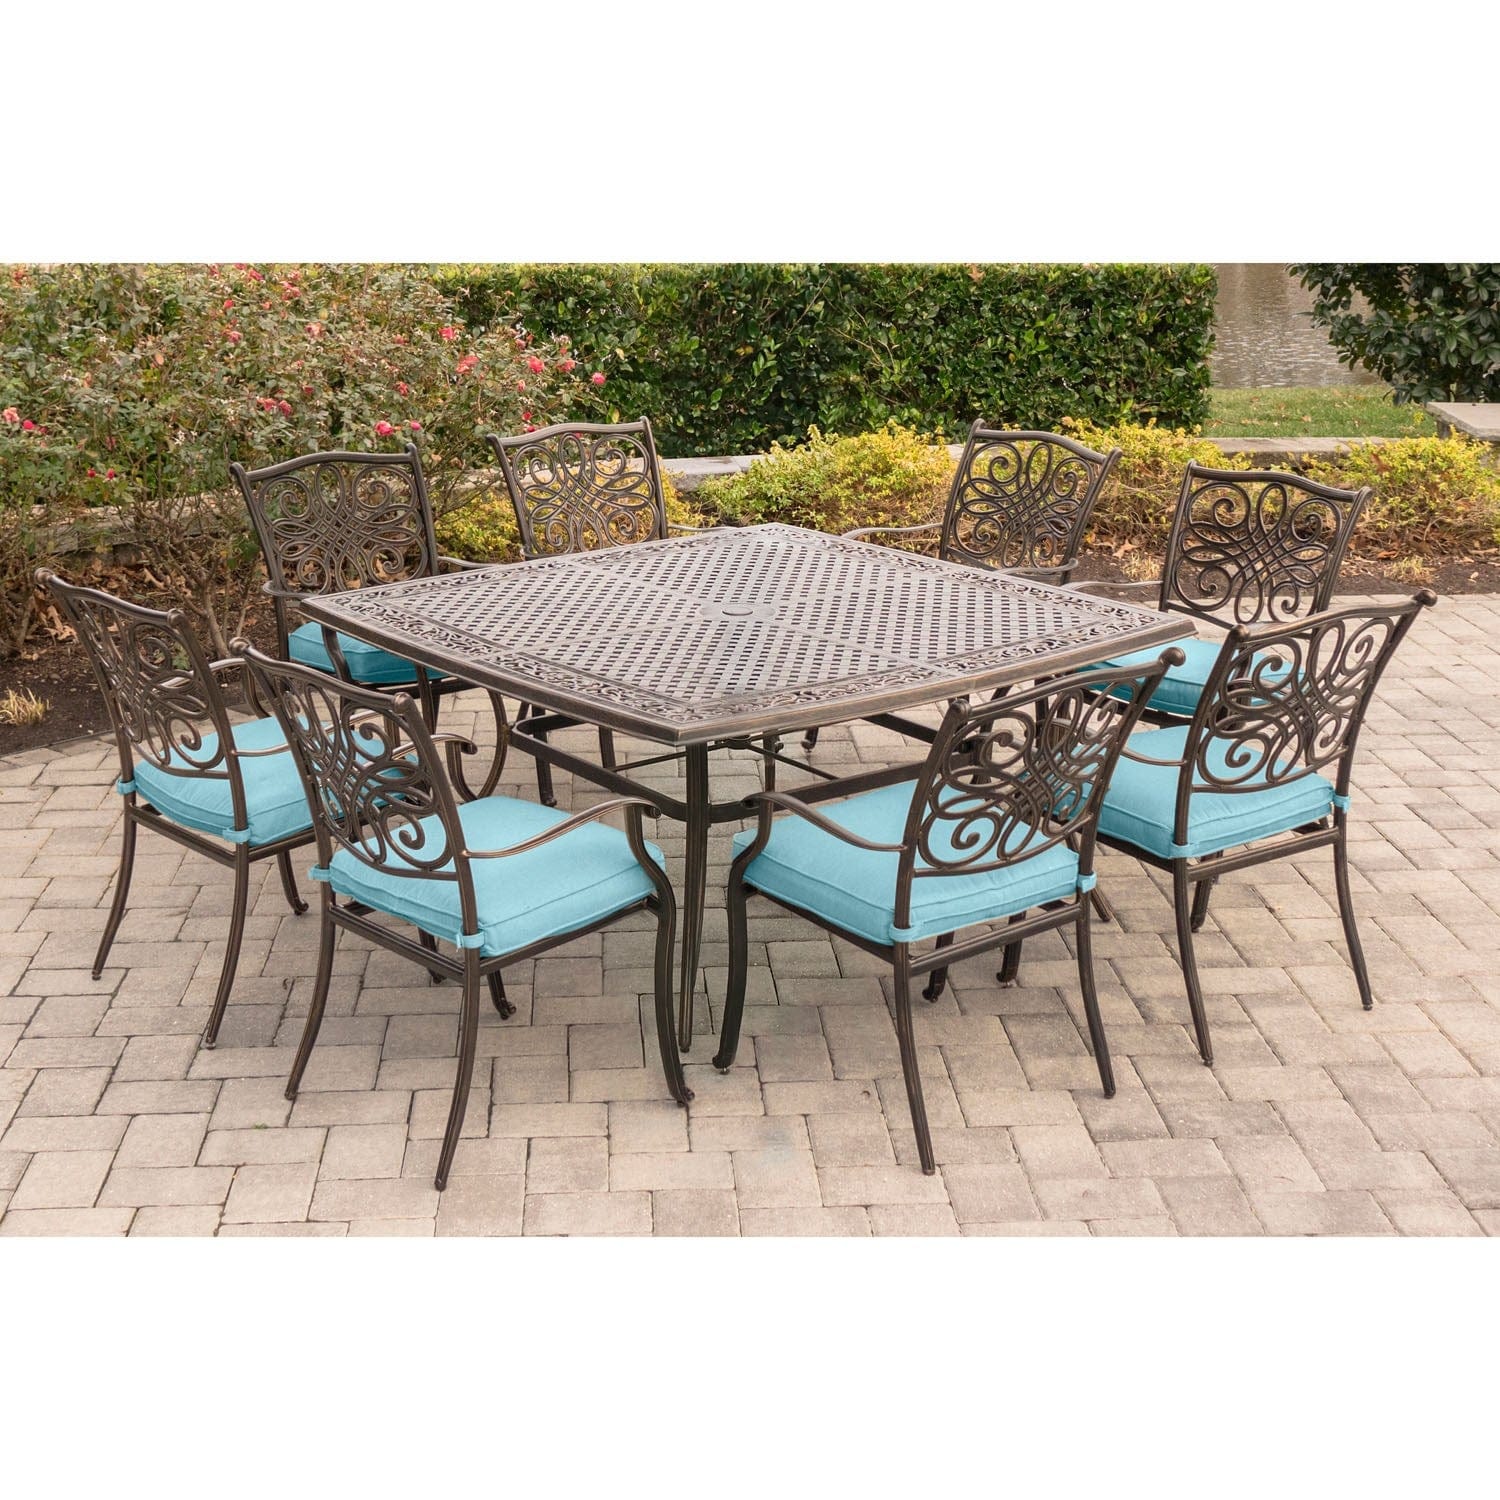 Hanover Outdoor Dining Set Hanover - Traditions 9-Piece Aluminum Frame Dining Set with Eight Dining Chairs Square Dining Set | Blue/Cast| TRADDN9PCSQ-BLU